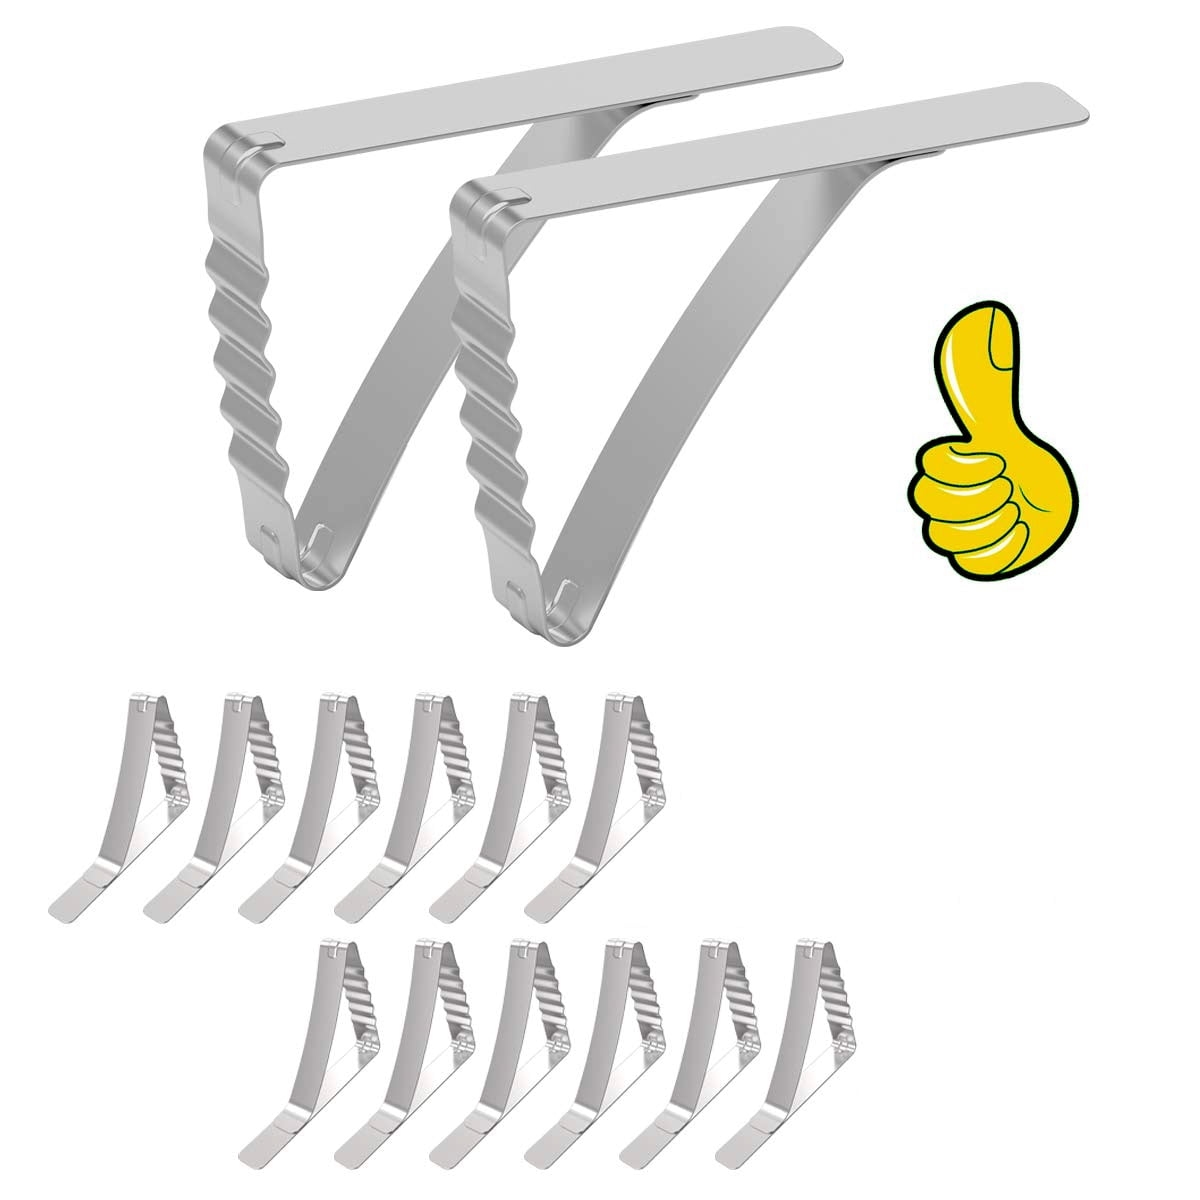 Large Uotyle Tablecloth Clamps Plastic Table Cloth Clips Cover Clamps Holder Clamp Clear for Home Kitchen Restaurant Party Picnic 3.5-5cm Thickness 60 Pcs